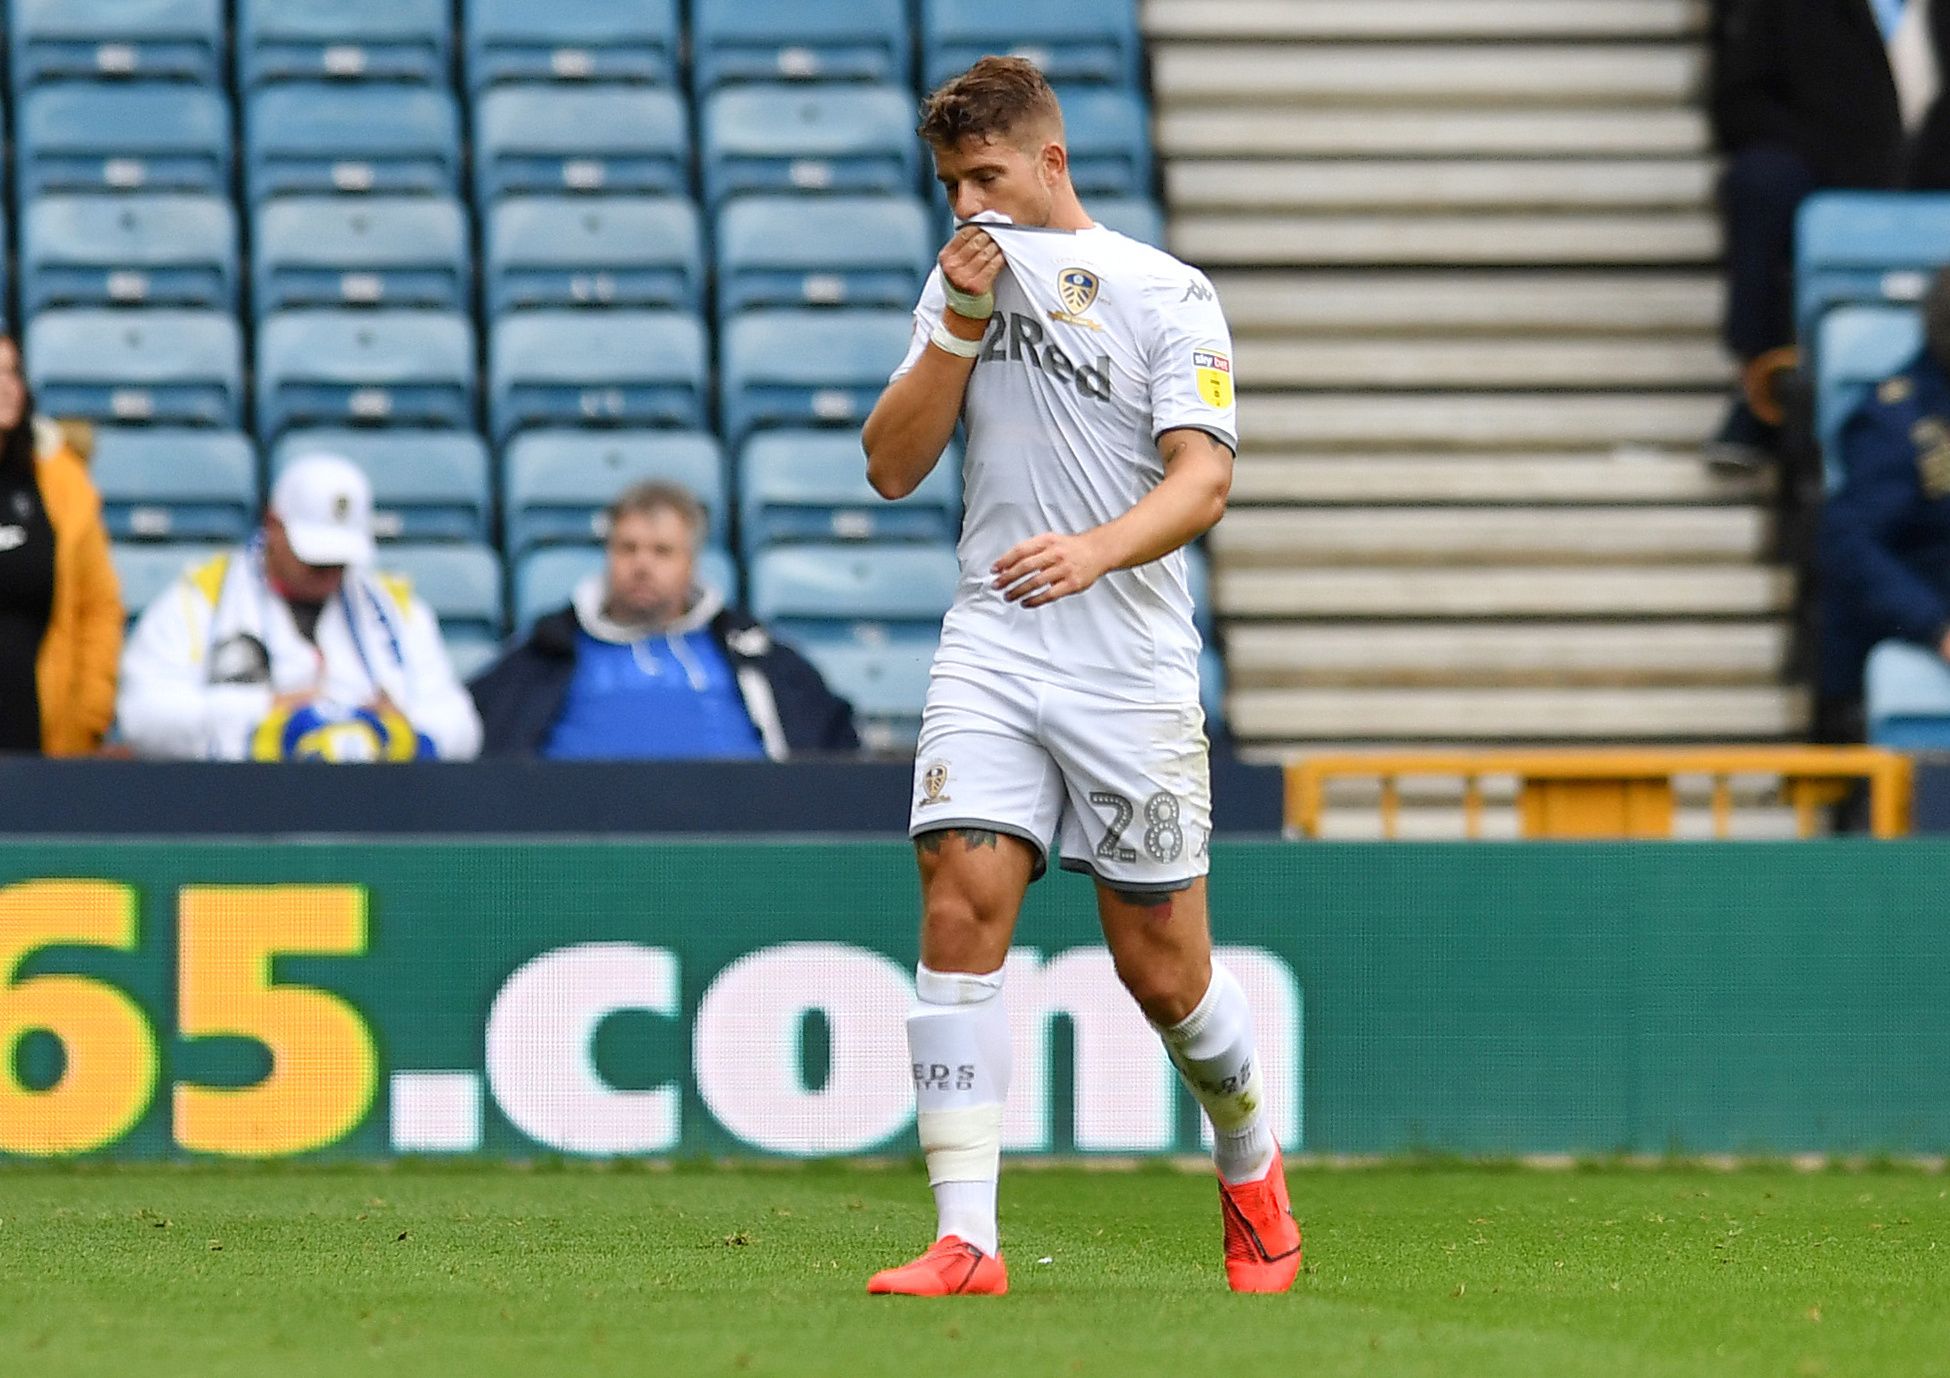 Soccer Football - Championship - Millwall v Leeds United - The Den, London, Britain - October 5, 2019  Leeds United's Gaetano Berardi leaves the pitch after being sent off  Action Images/Alan Walter  EDITORIAL USE ONLY. No use with unauthorized audio, video, data, fixture lists, club/league logos or 